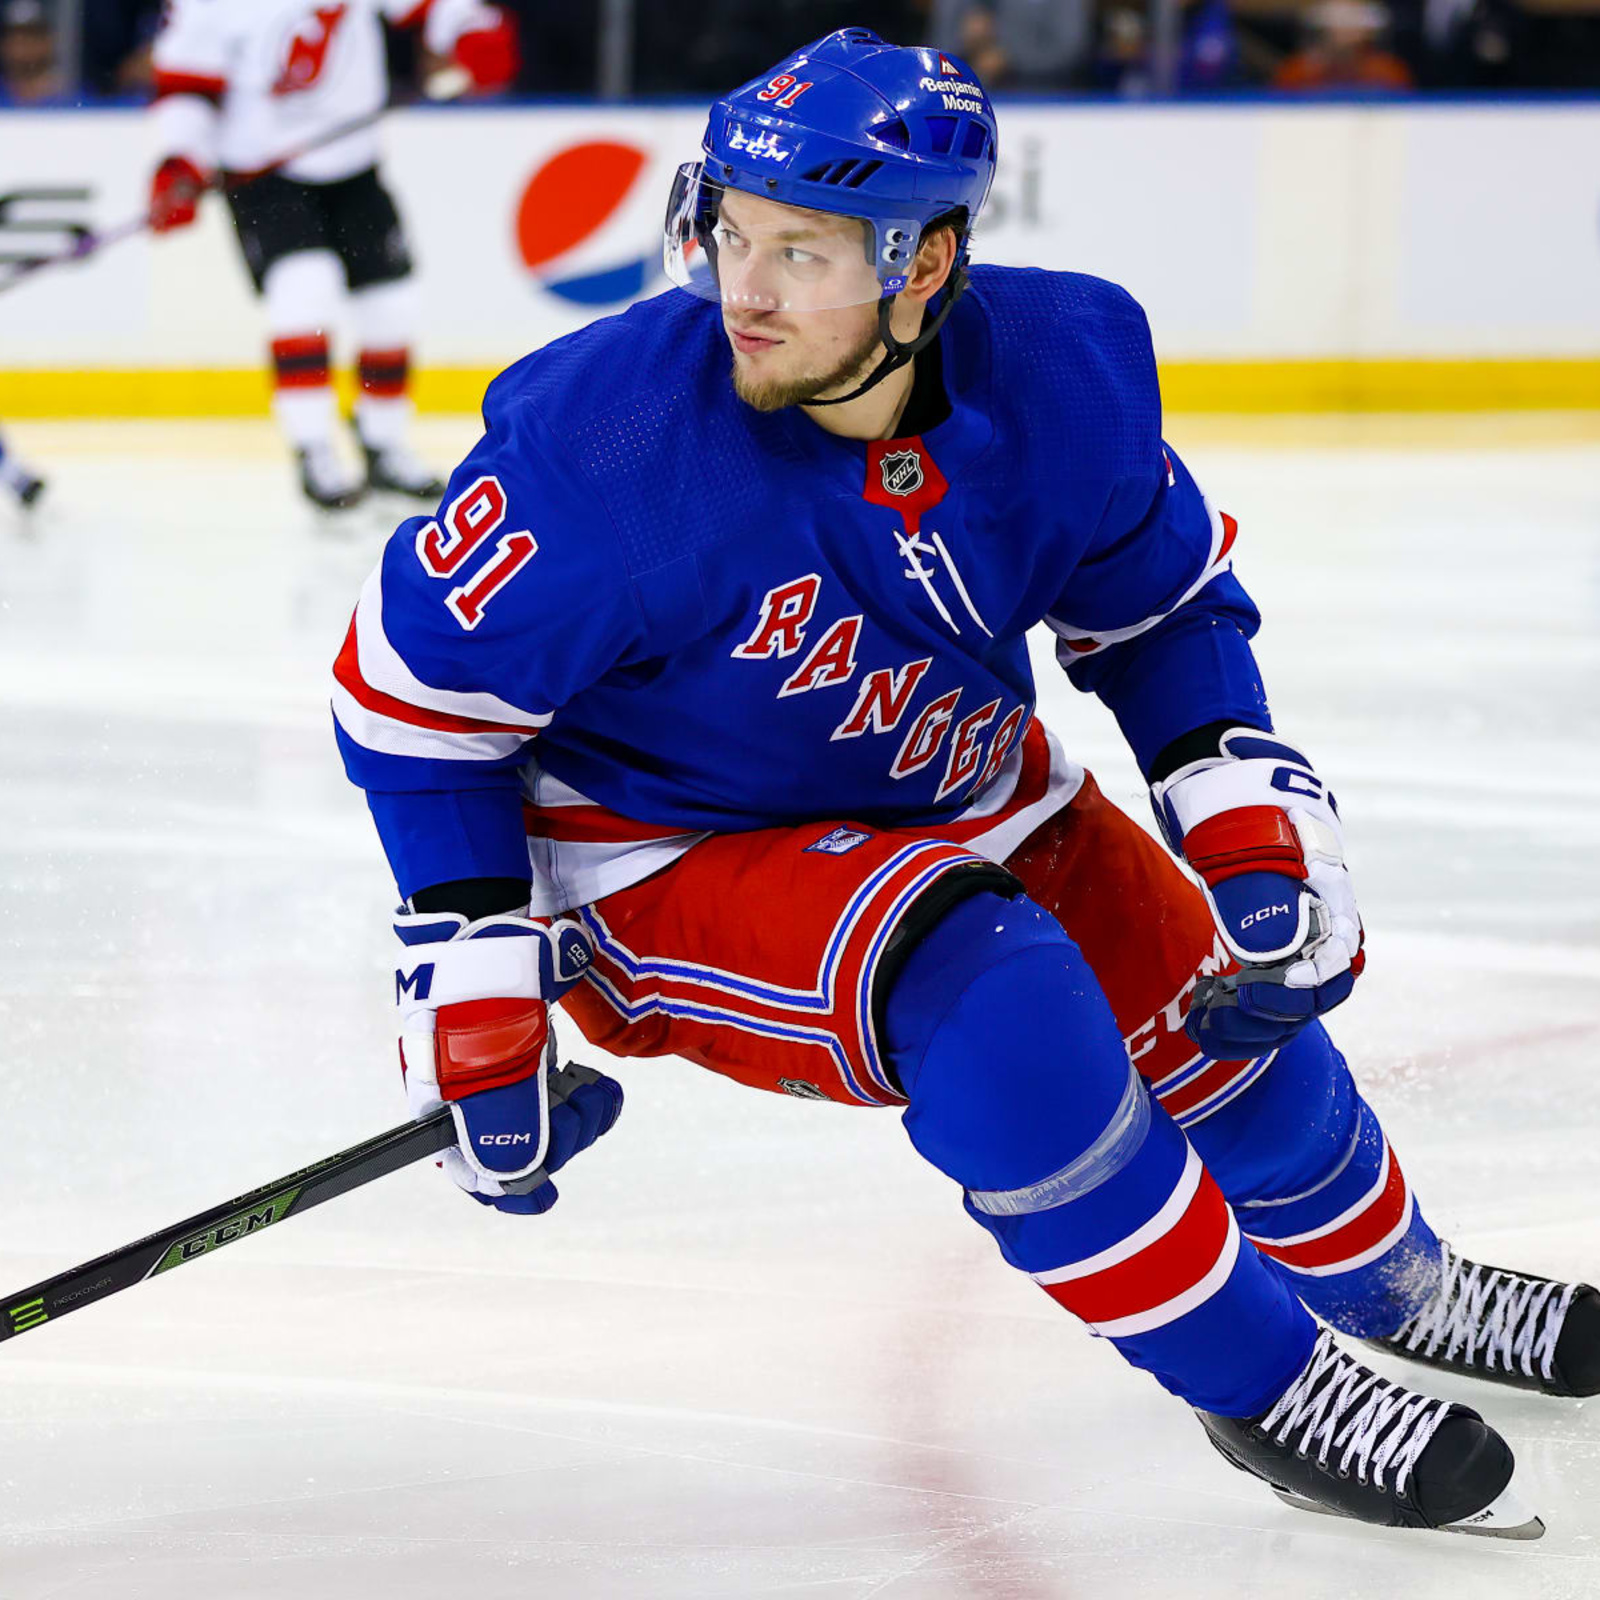 Options to fill the New York Rangers' final spot on defense